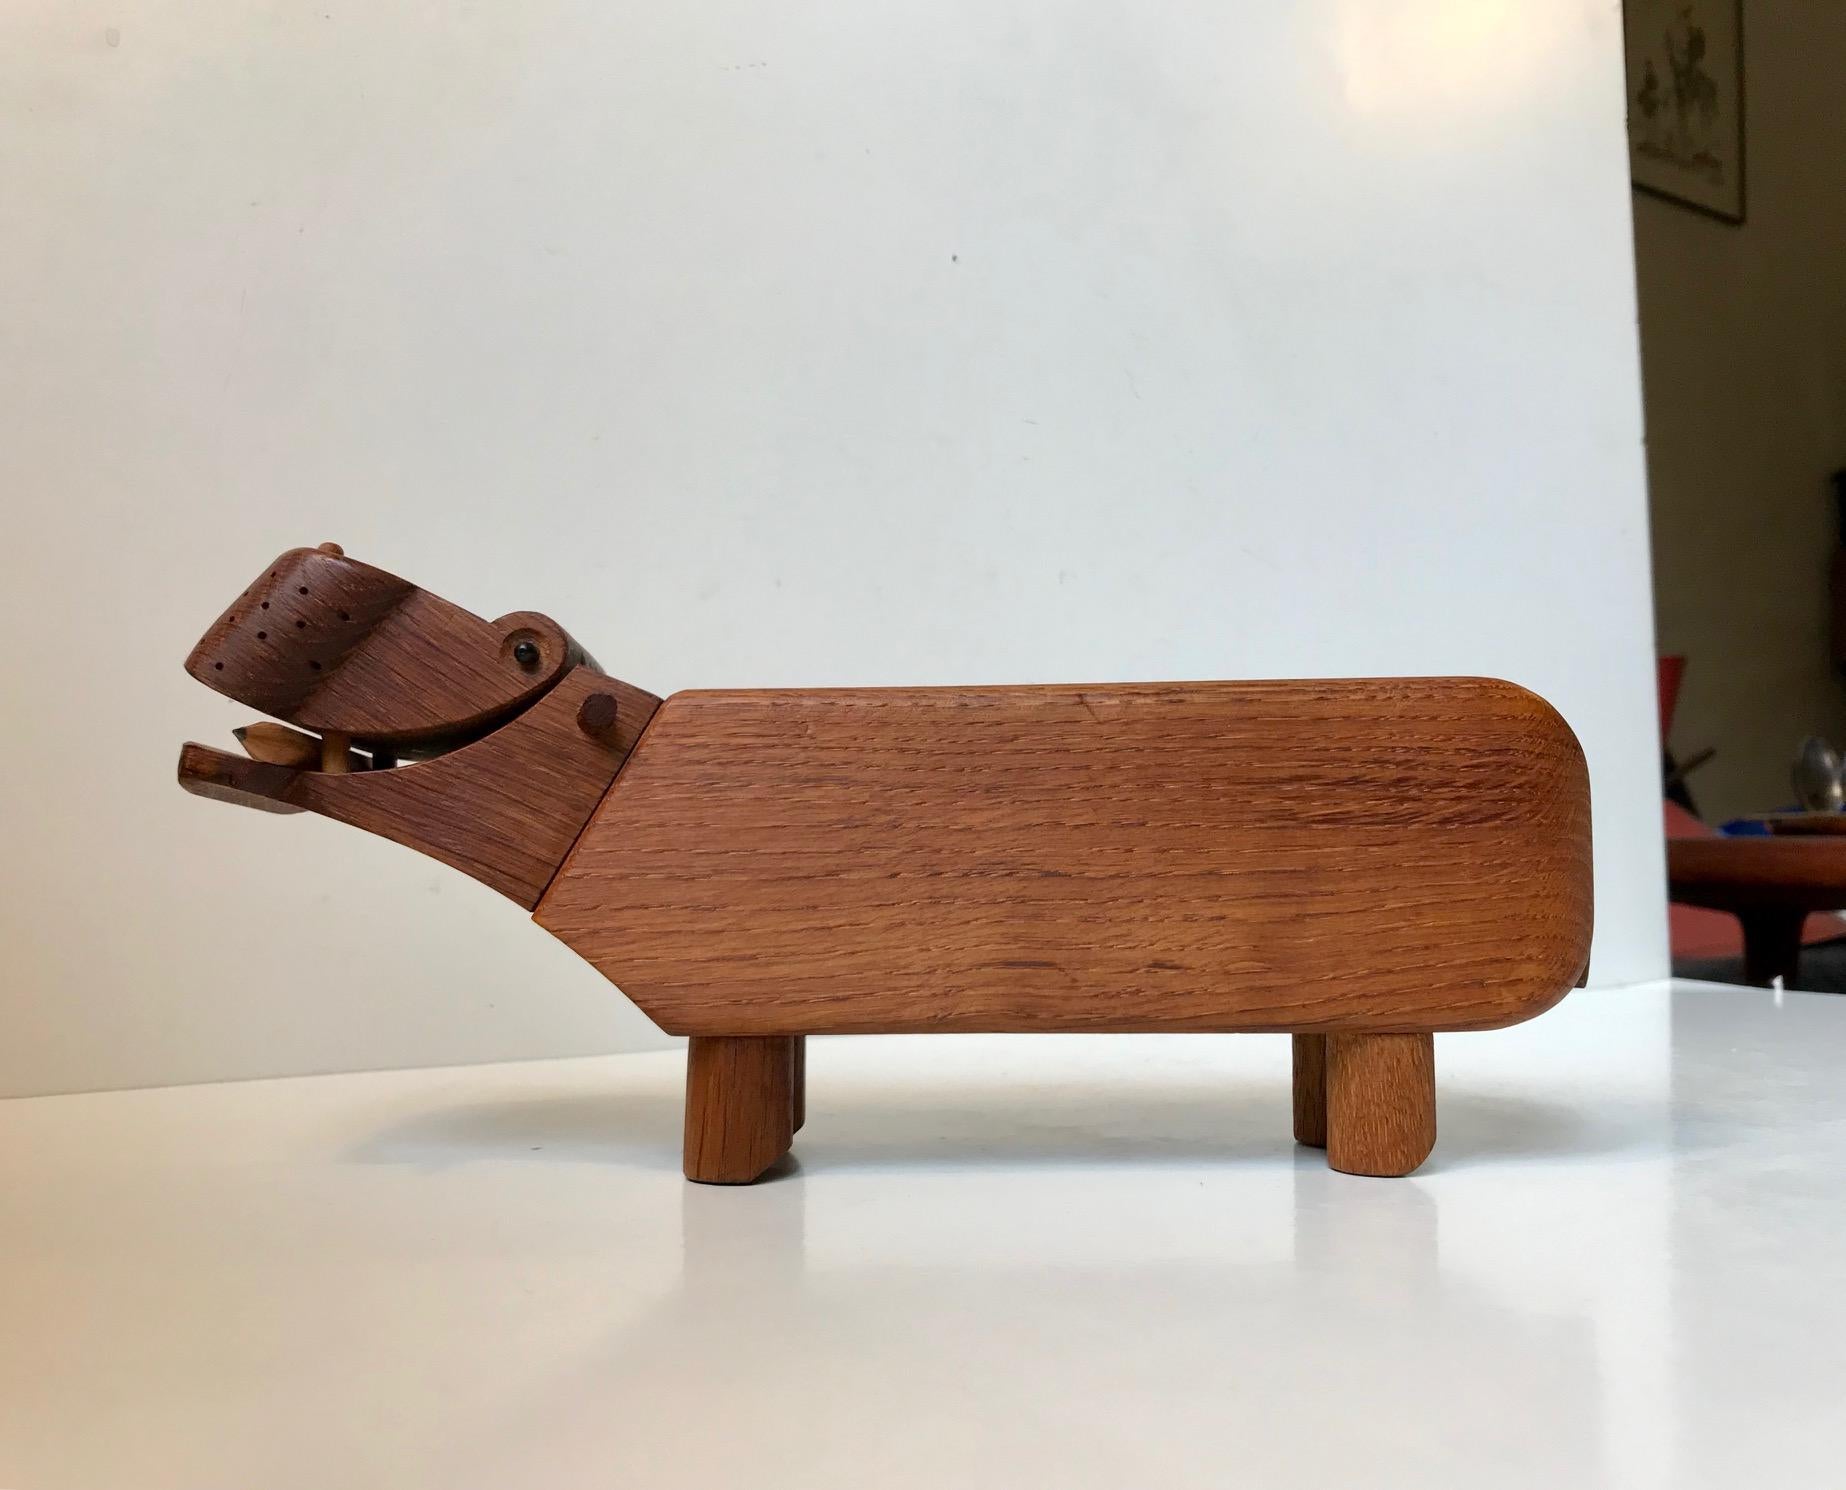 Museum quality and definitely the most well kept and evenly patinated early Hippo by Kay Bojesen i have ever seen during my 20 years as a dealer and vivid collector. Kay Bojesen's drawing table was unorganized and messy so designed the Hippopotamus